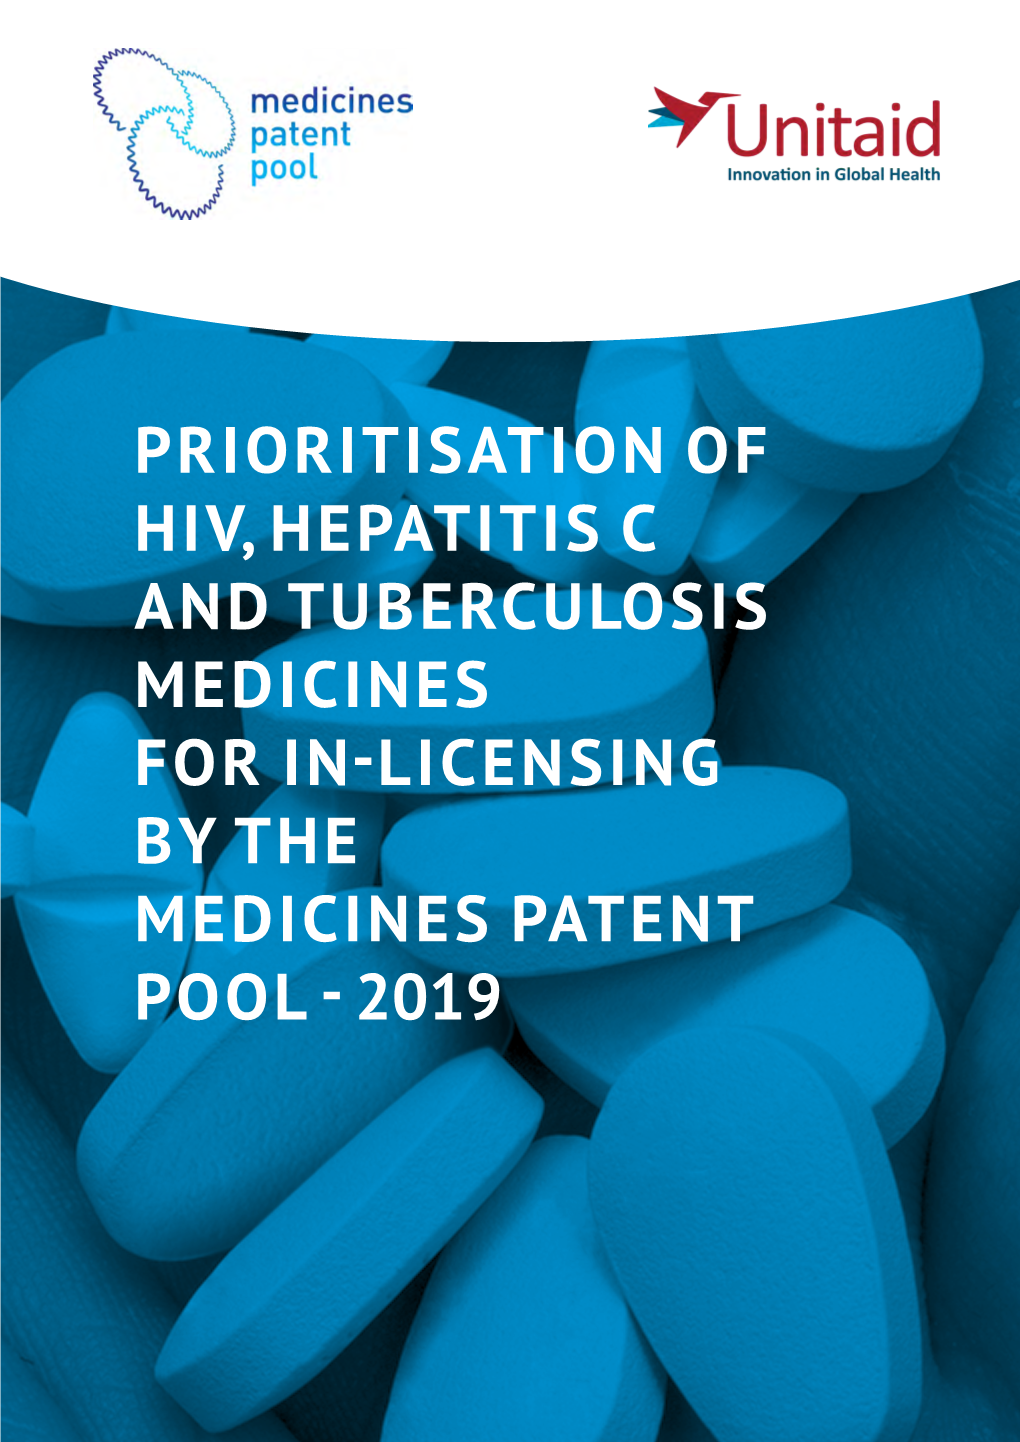 Prioritisation of Hiv, Hepatitis C and Tuberculosis Medicines for In-Licensing by the Medicines Patent Pool - 2019 Table of Contents